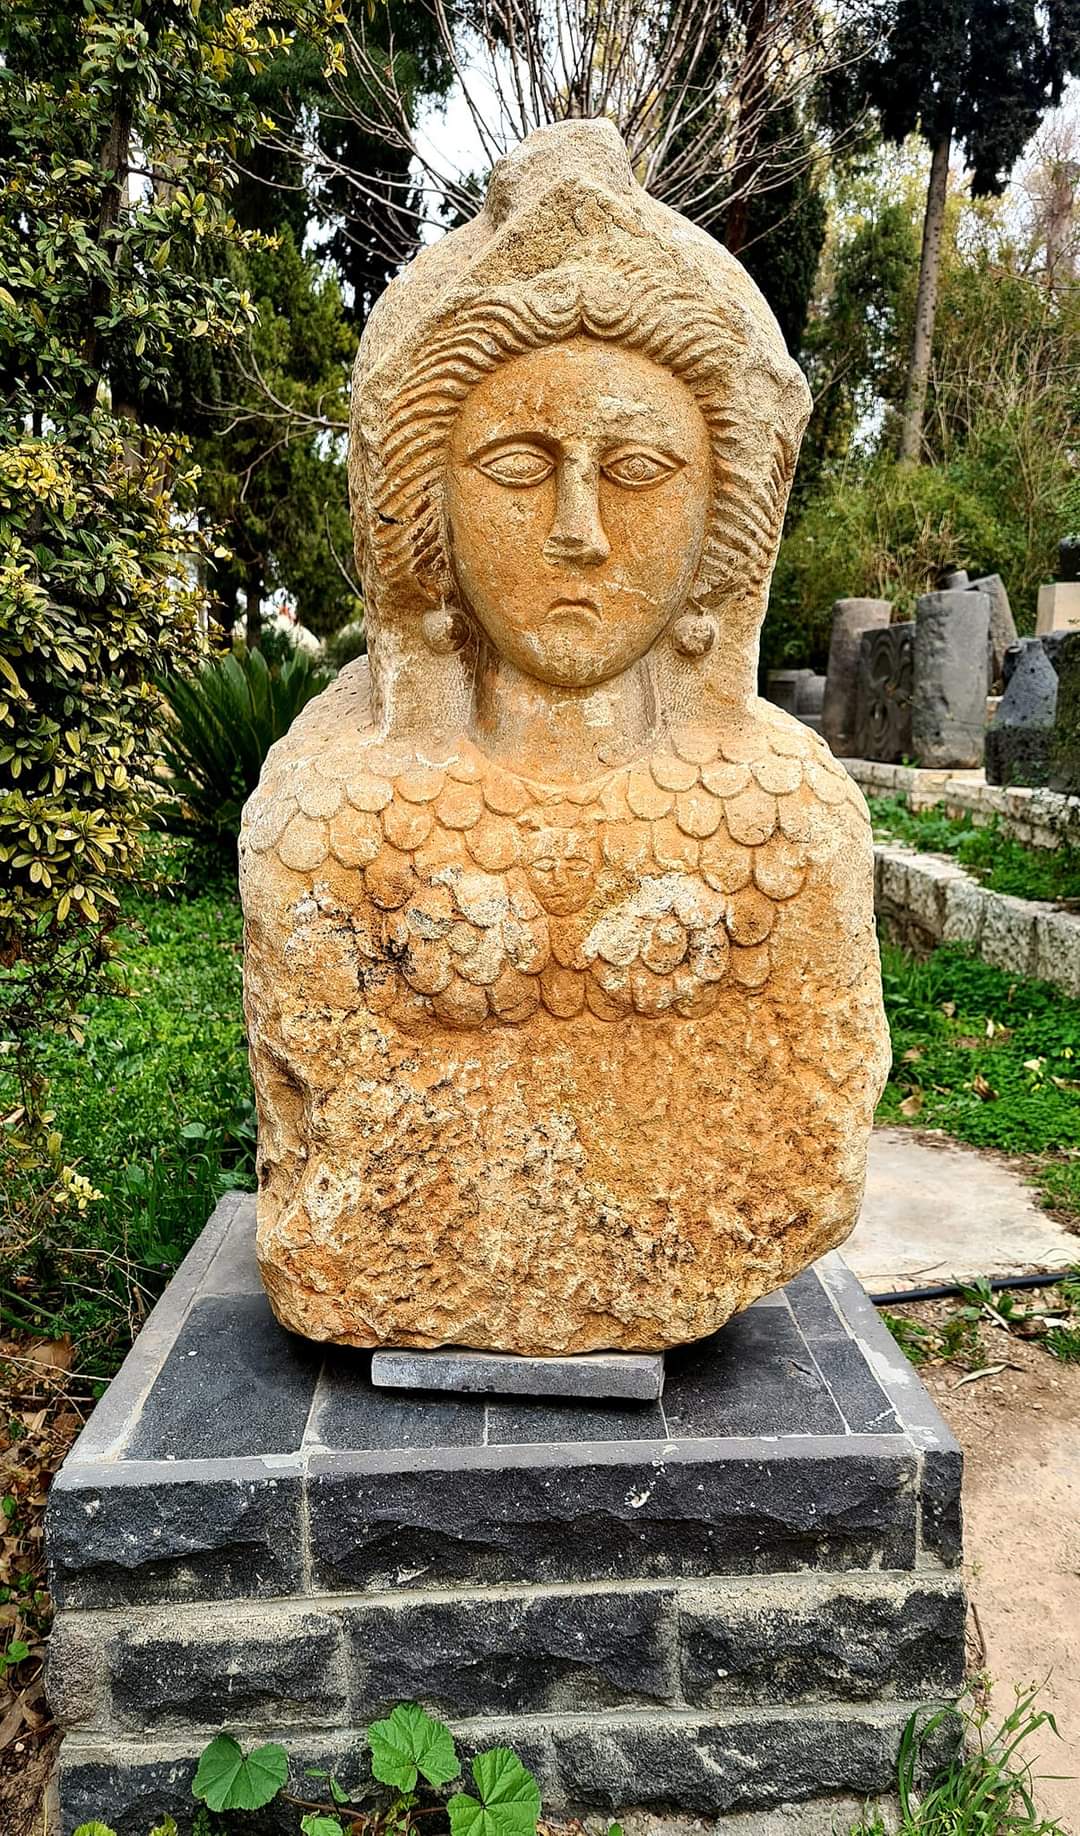 A statue in the National Museum of Damascus, Syria